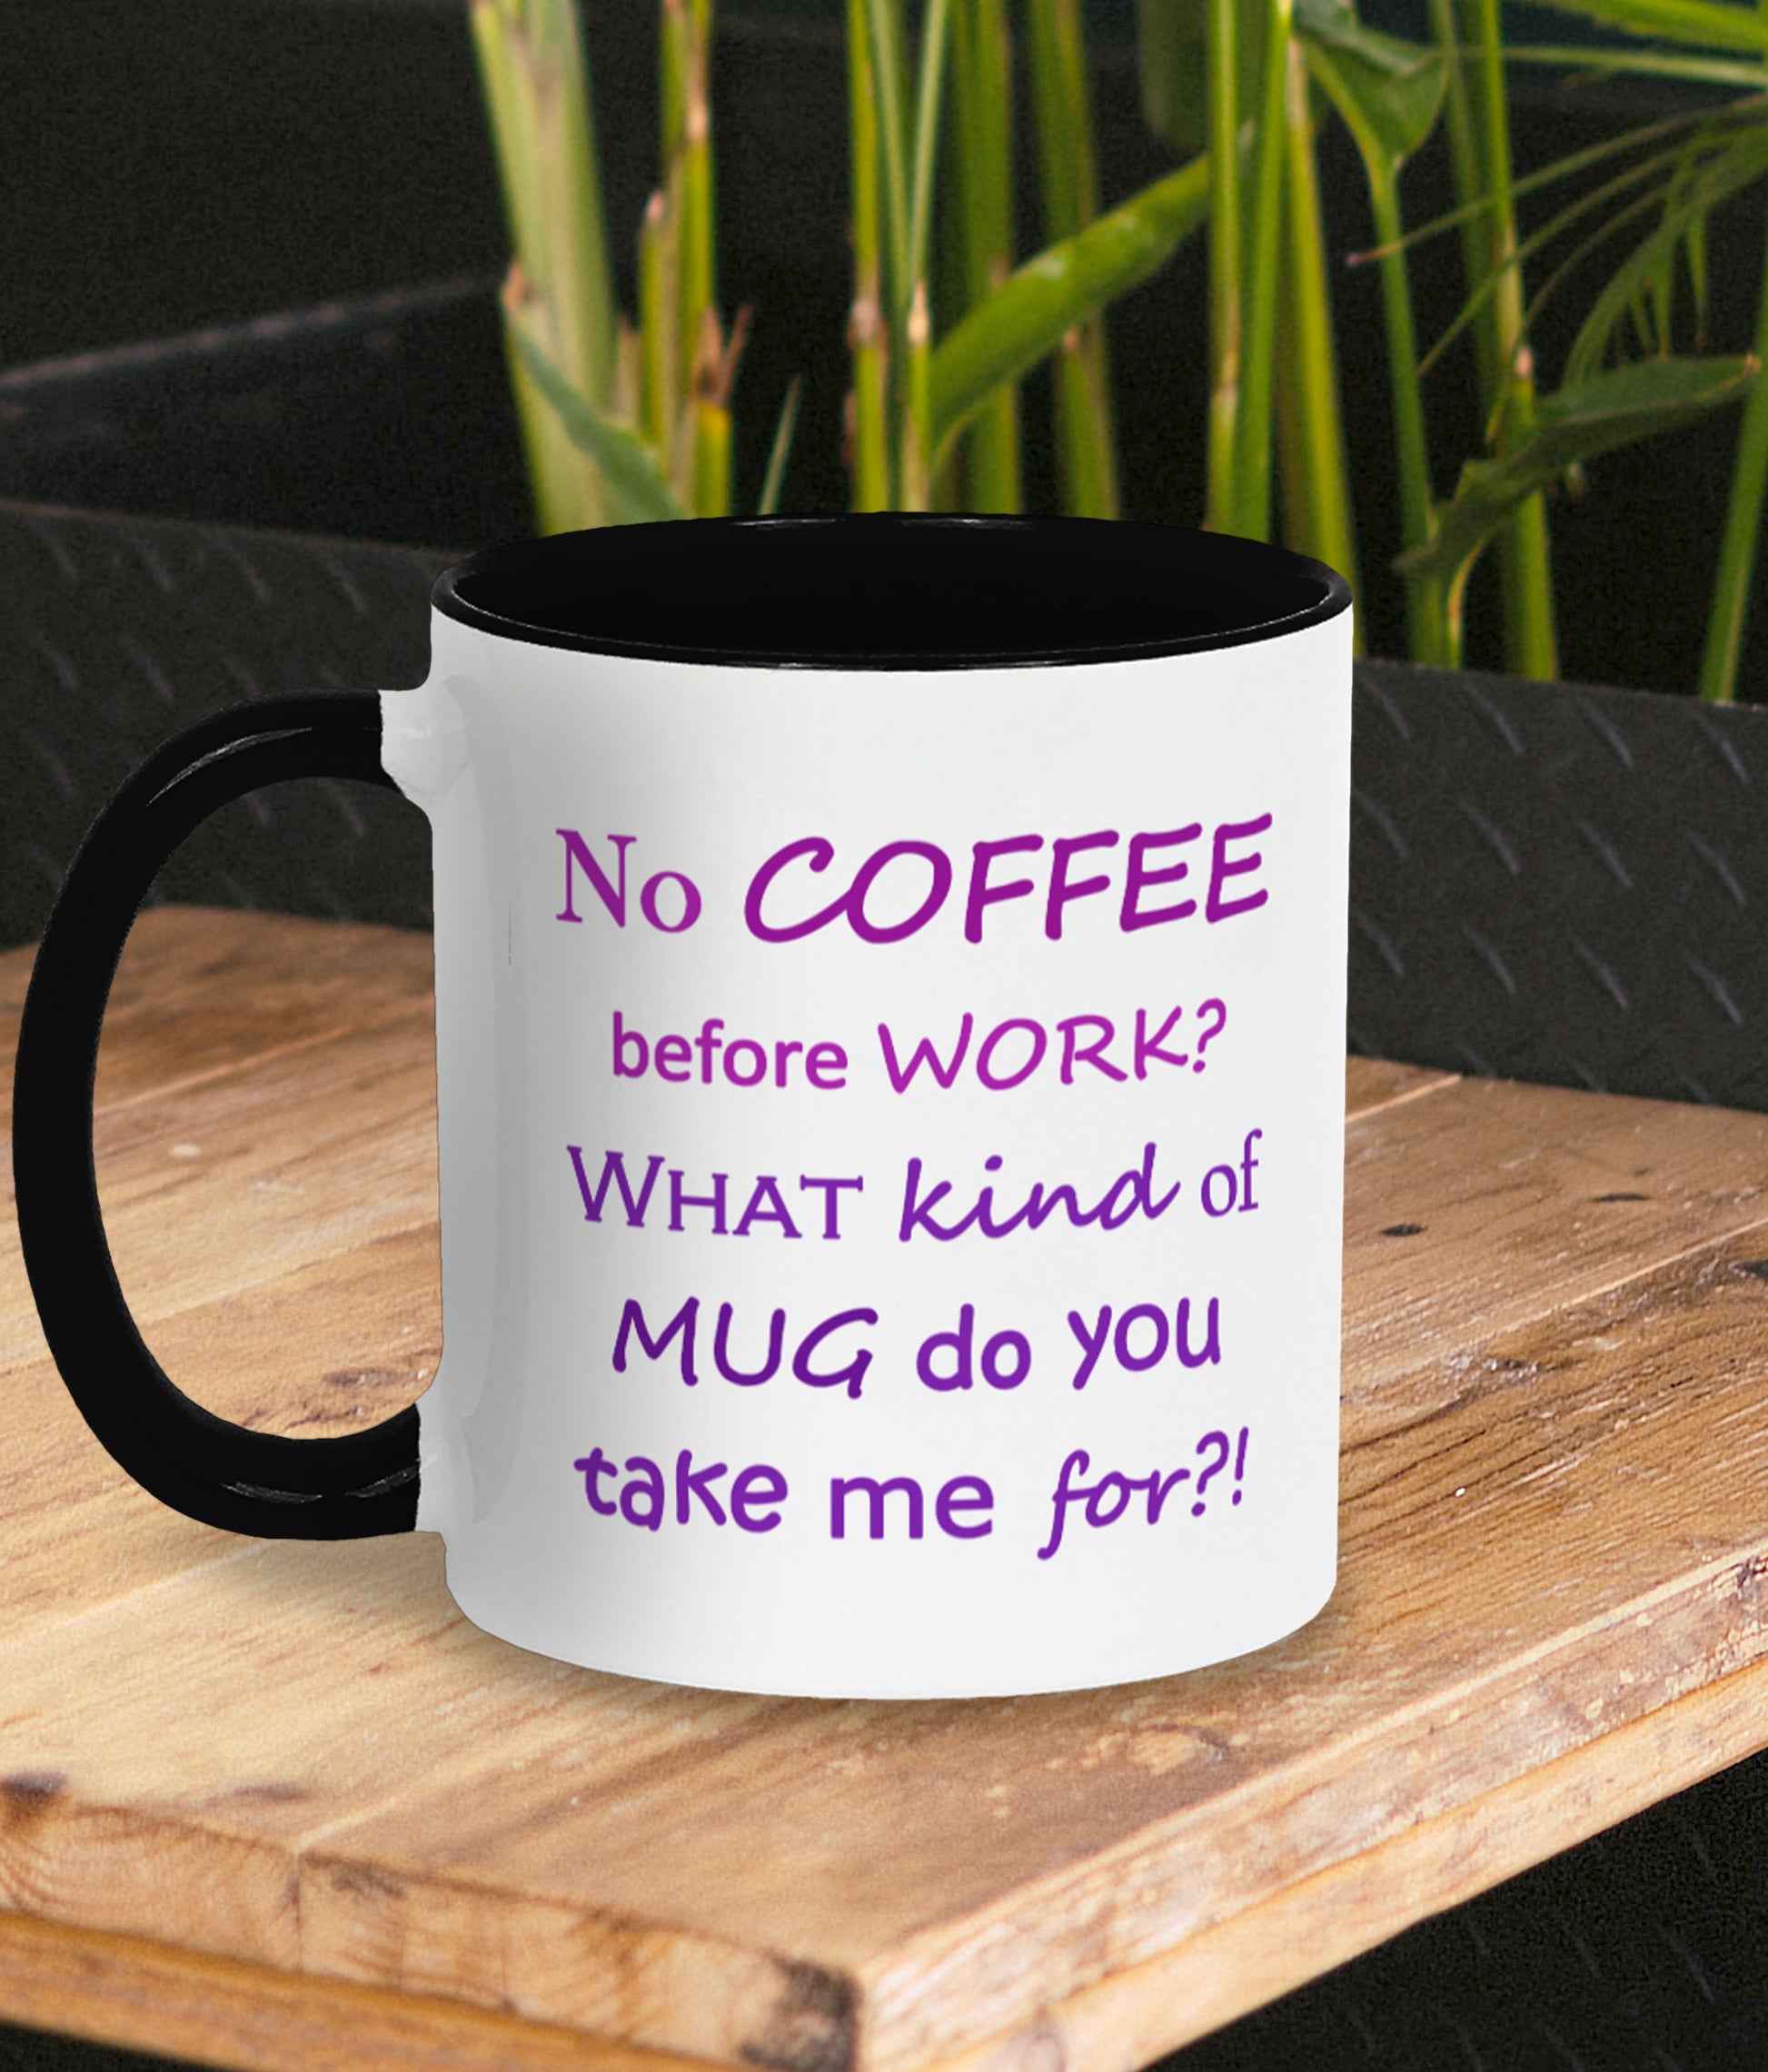 Funny mug for work. Gift for coffee lover and work bestie. White mug with black inner and handle. Two tone purple text on mug reads humorous words No COFFEE before WORK? WHAT kind of MUG do you take me for?! Showing design on mug with handle to the left side. 